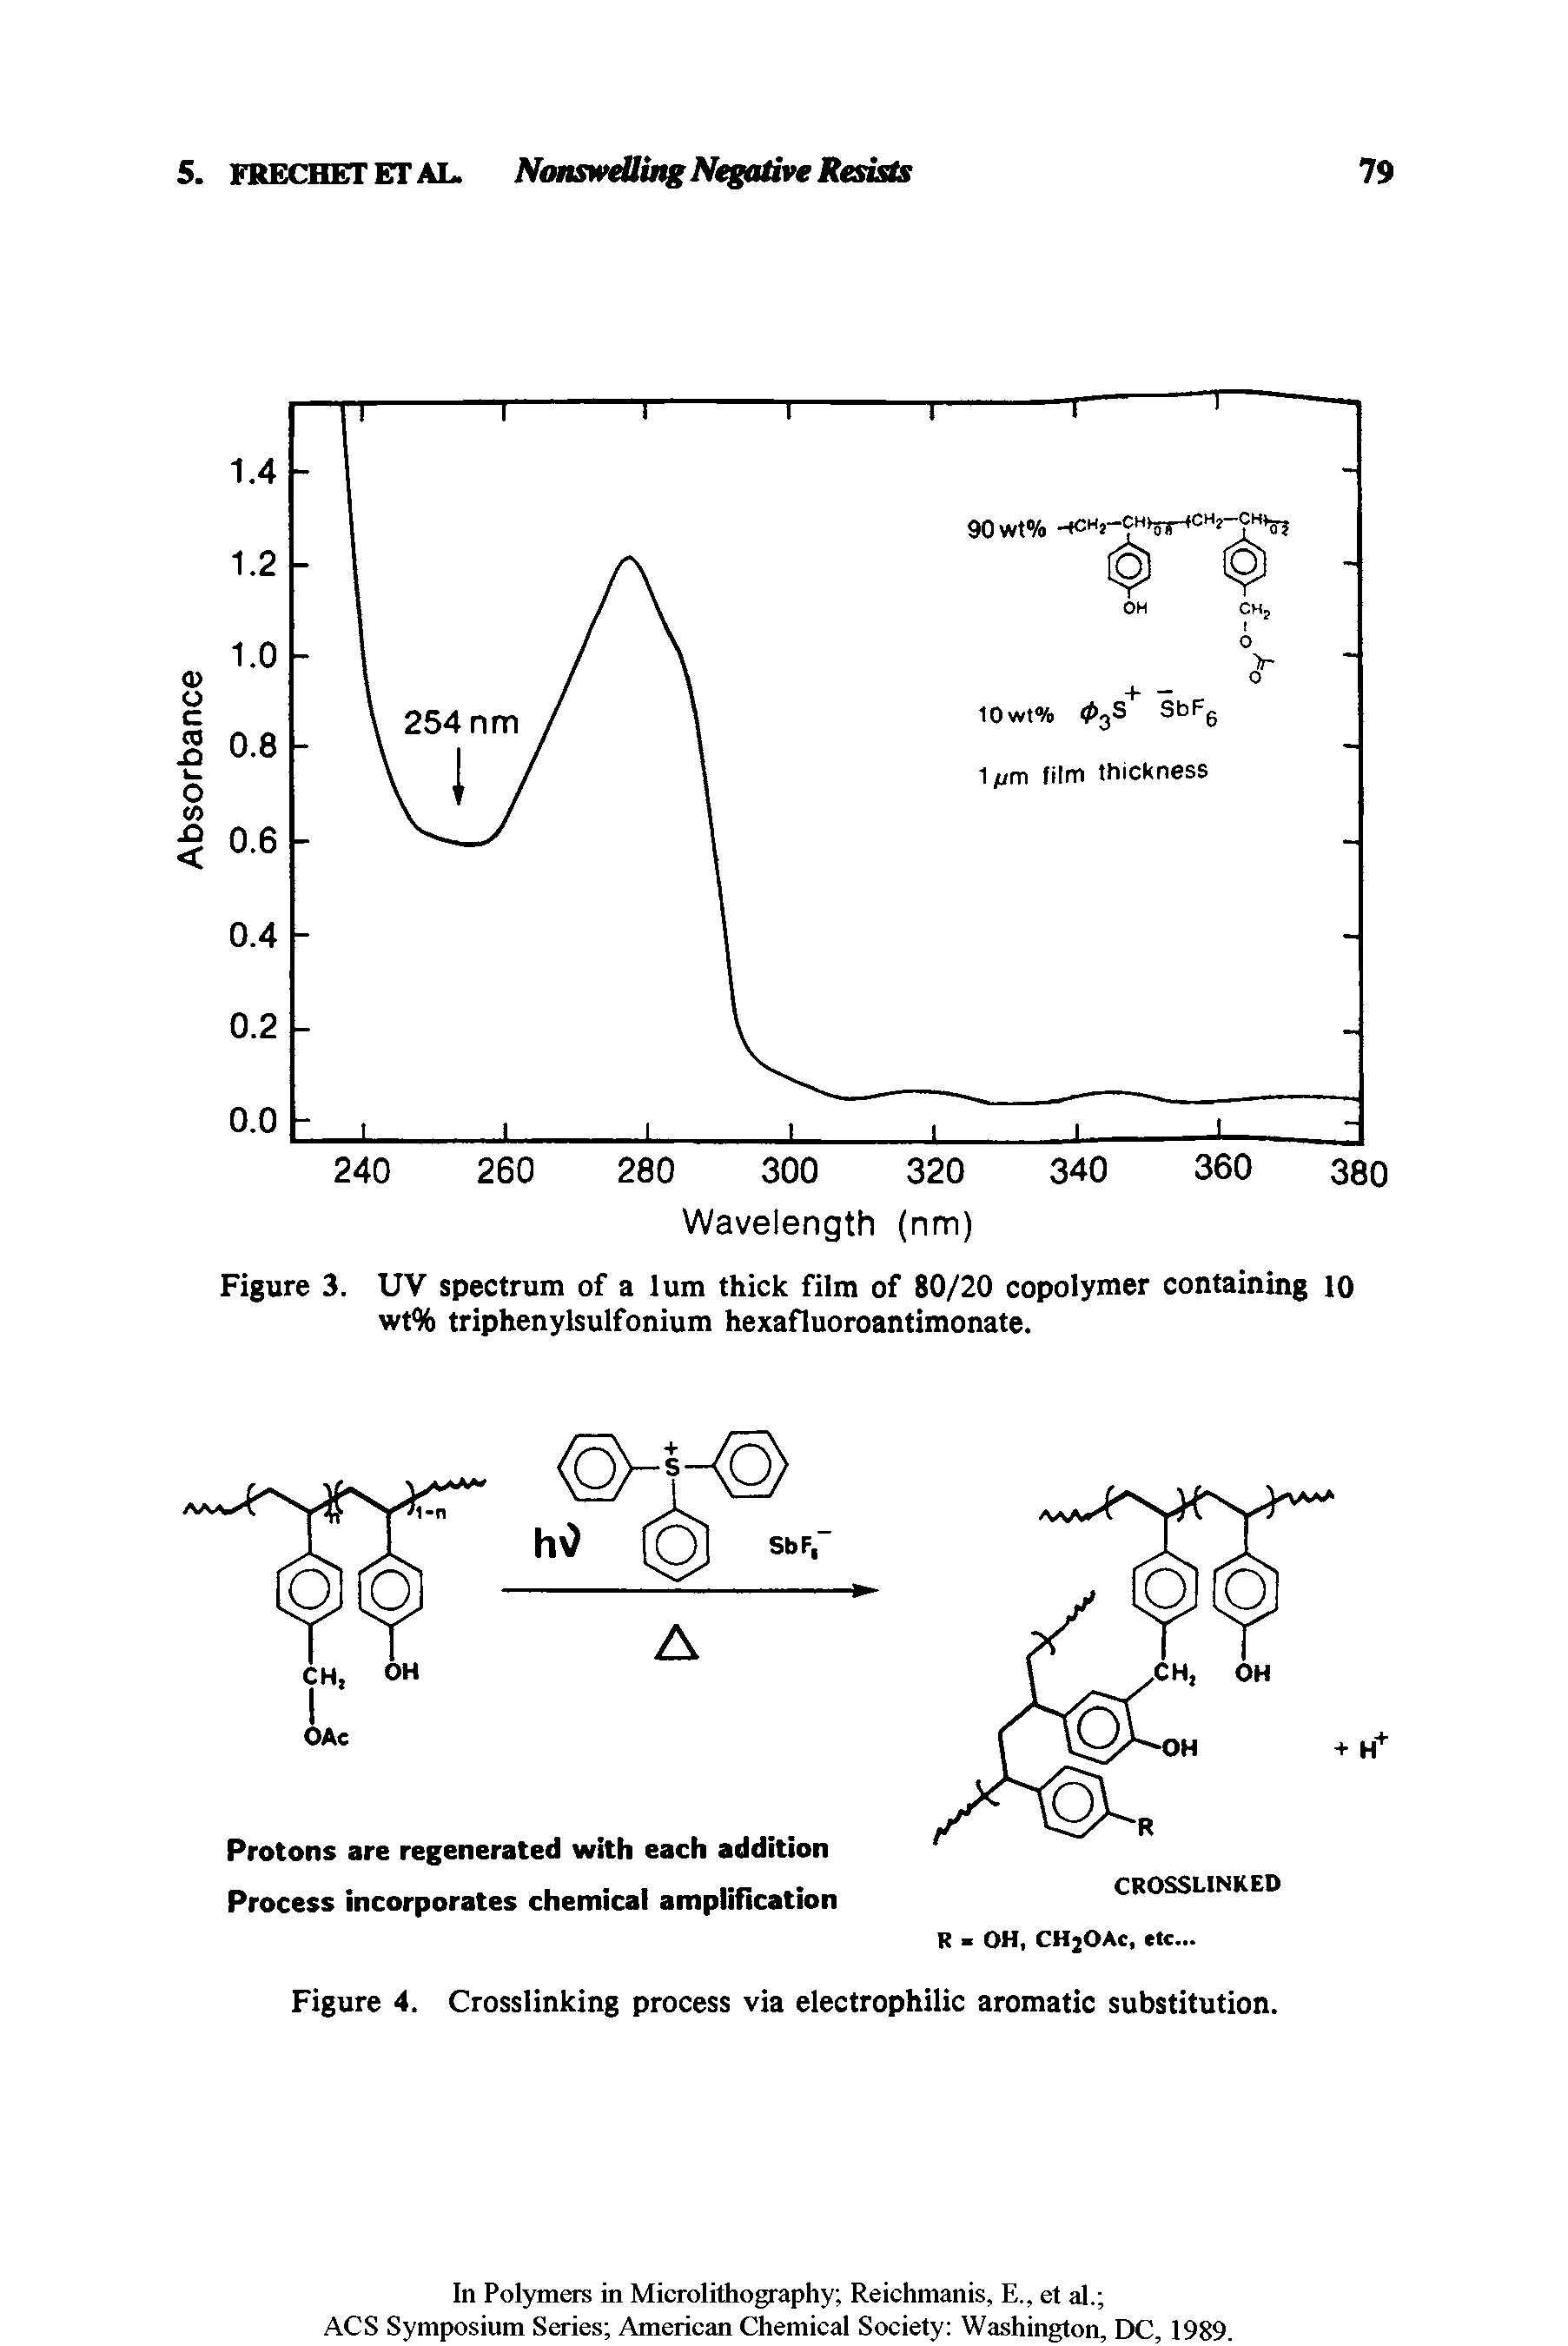 Figure 3. UV spectrum of a 1 urn thick film of 80/20 copolymer containing 10 wt% triphenylsulfonium hexafluoroantimonate.